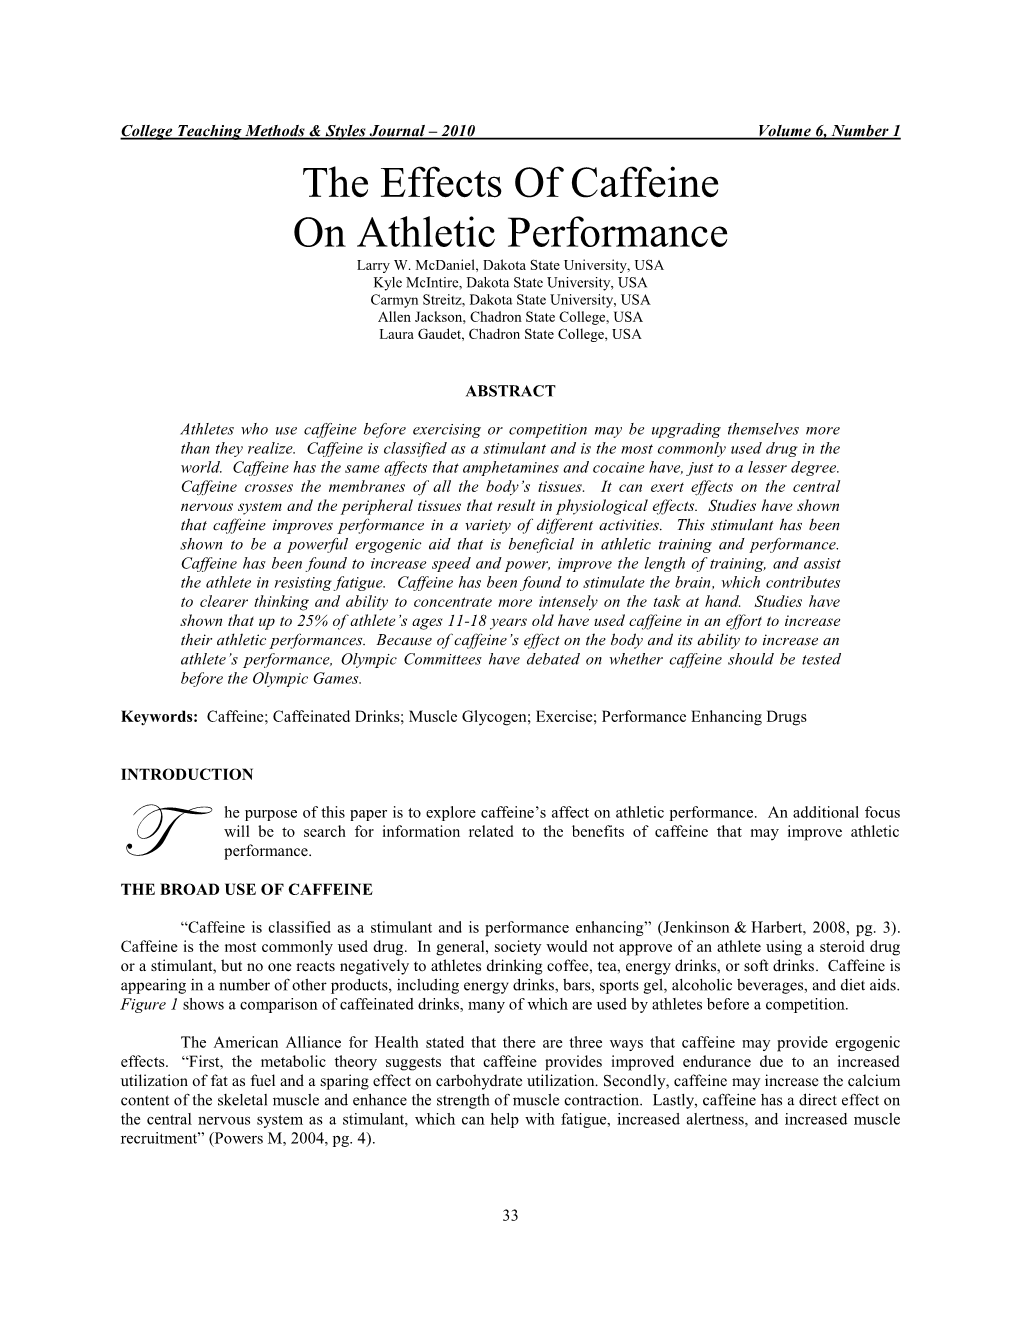 The Effects of Caffeine on Athletic Performance Larry W